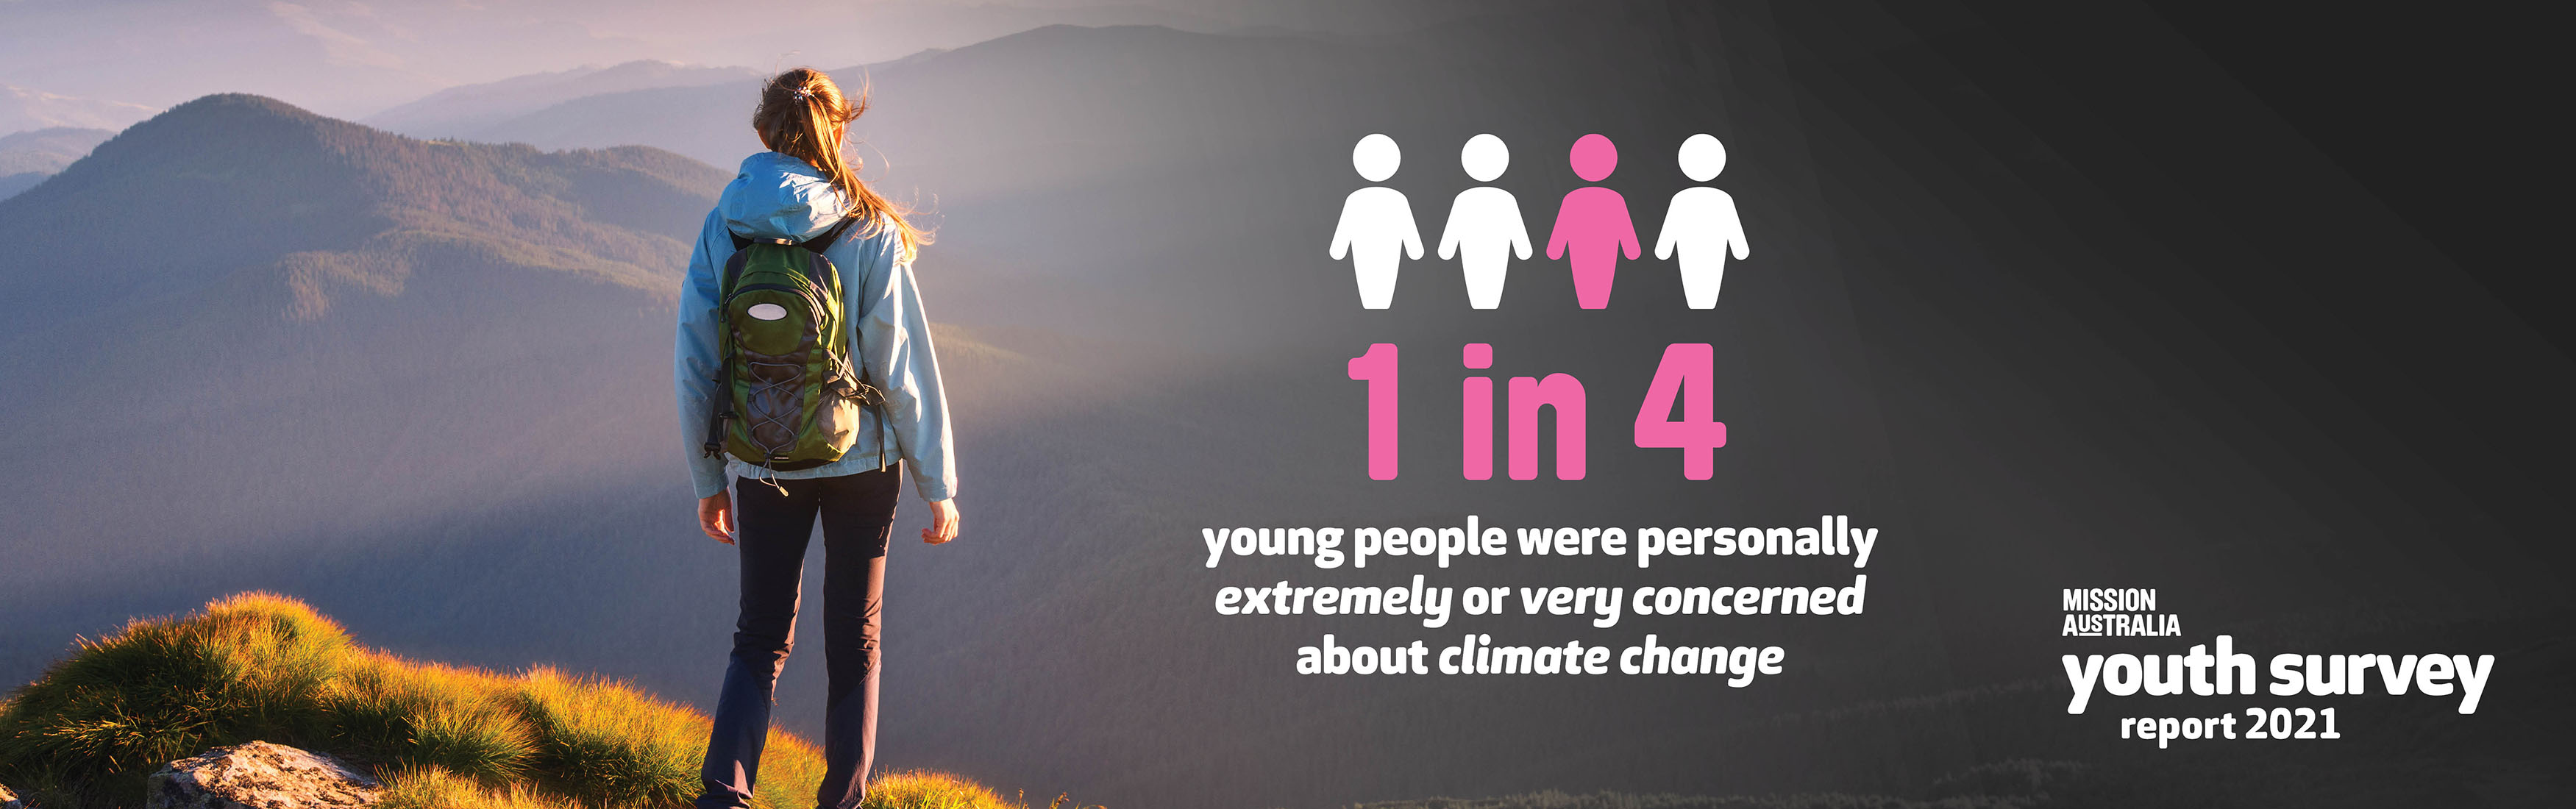  Image of a young lady hiking. Text on top of image reads, “One in four young people surveyed said they were personally extremely or very concerned about climate change.”